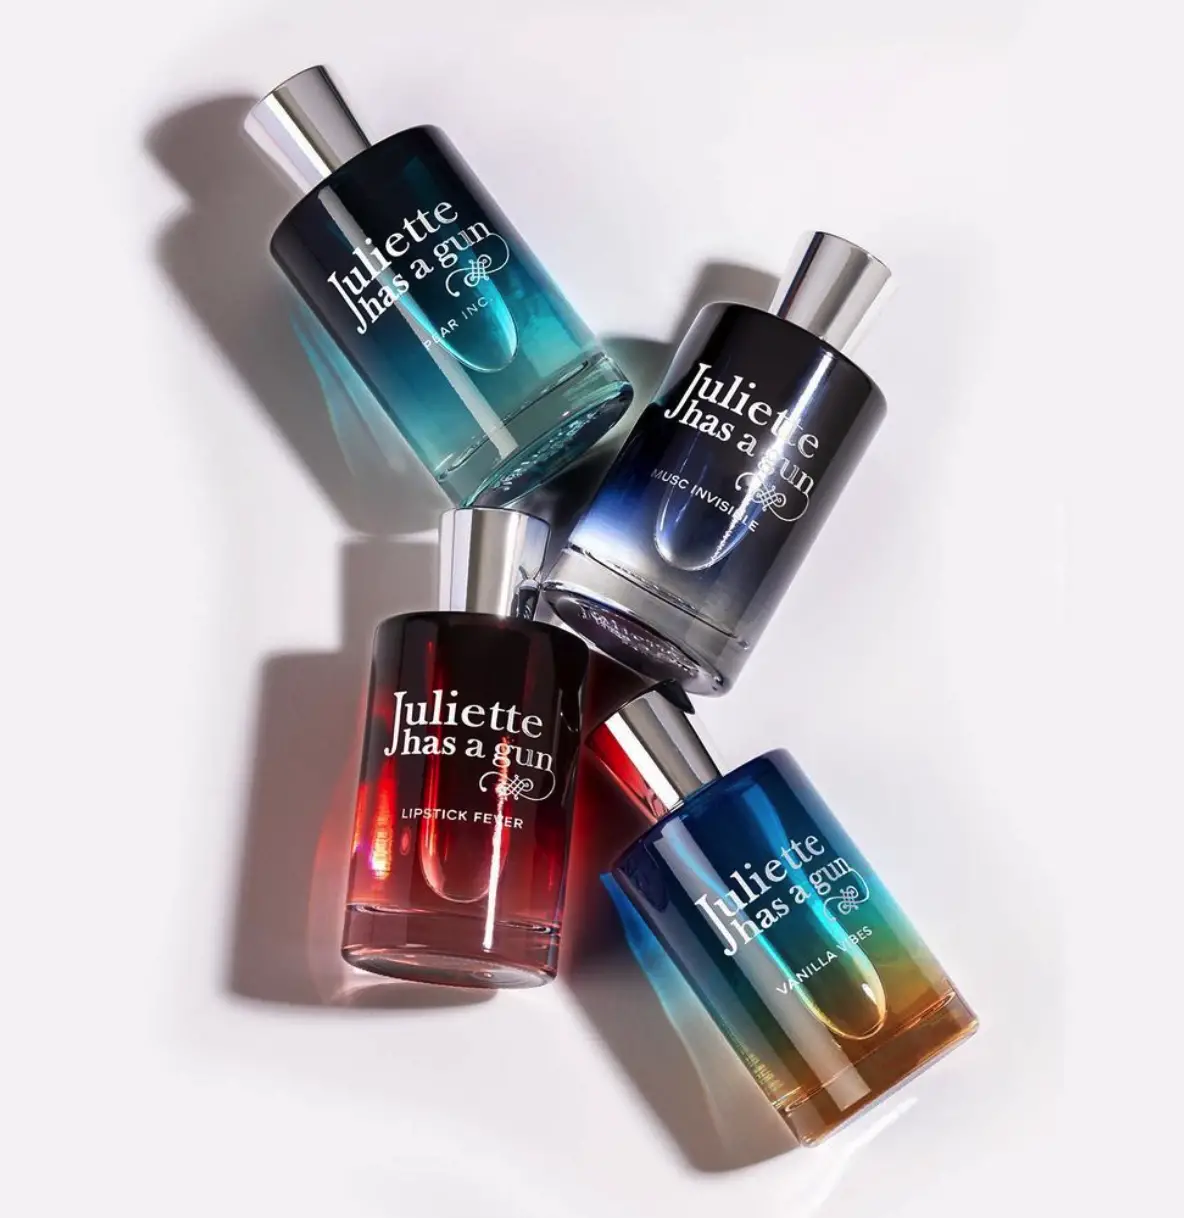 The Ultimate Guide To The Juliette Has A Gun Perfume Range